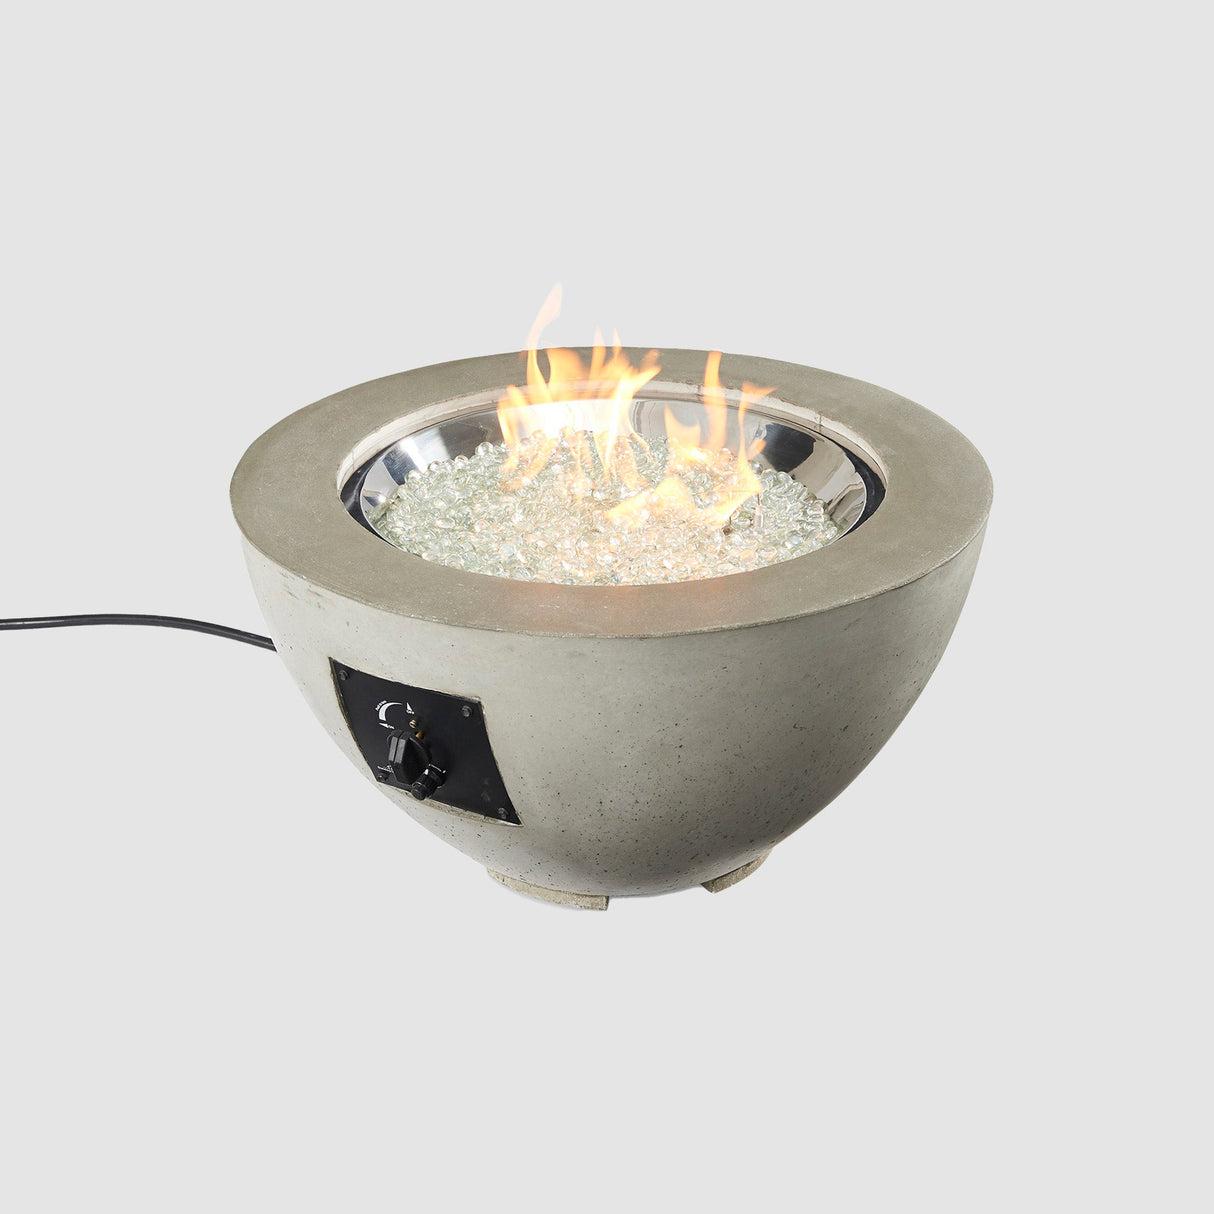 Cove Round Gas Fire Pit Bowl 29" on a grey background